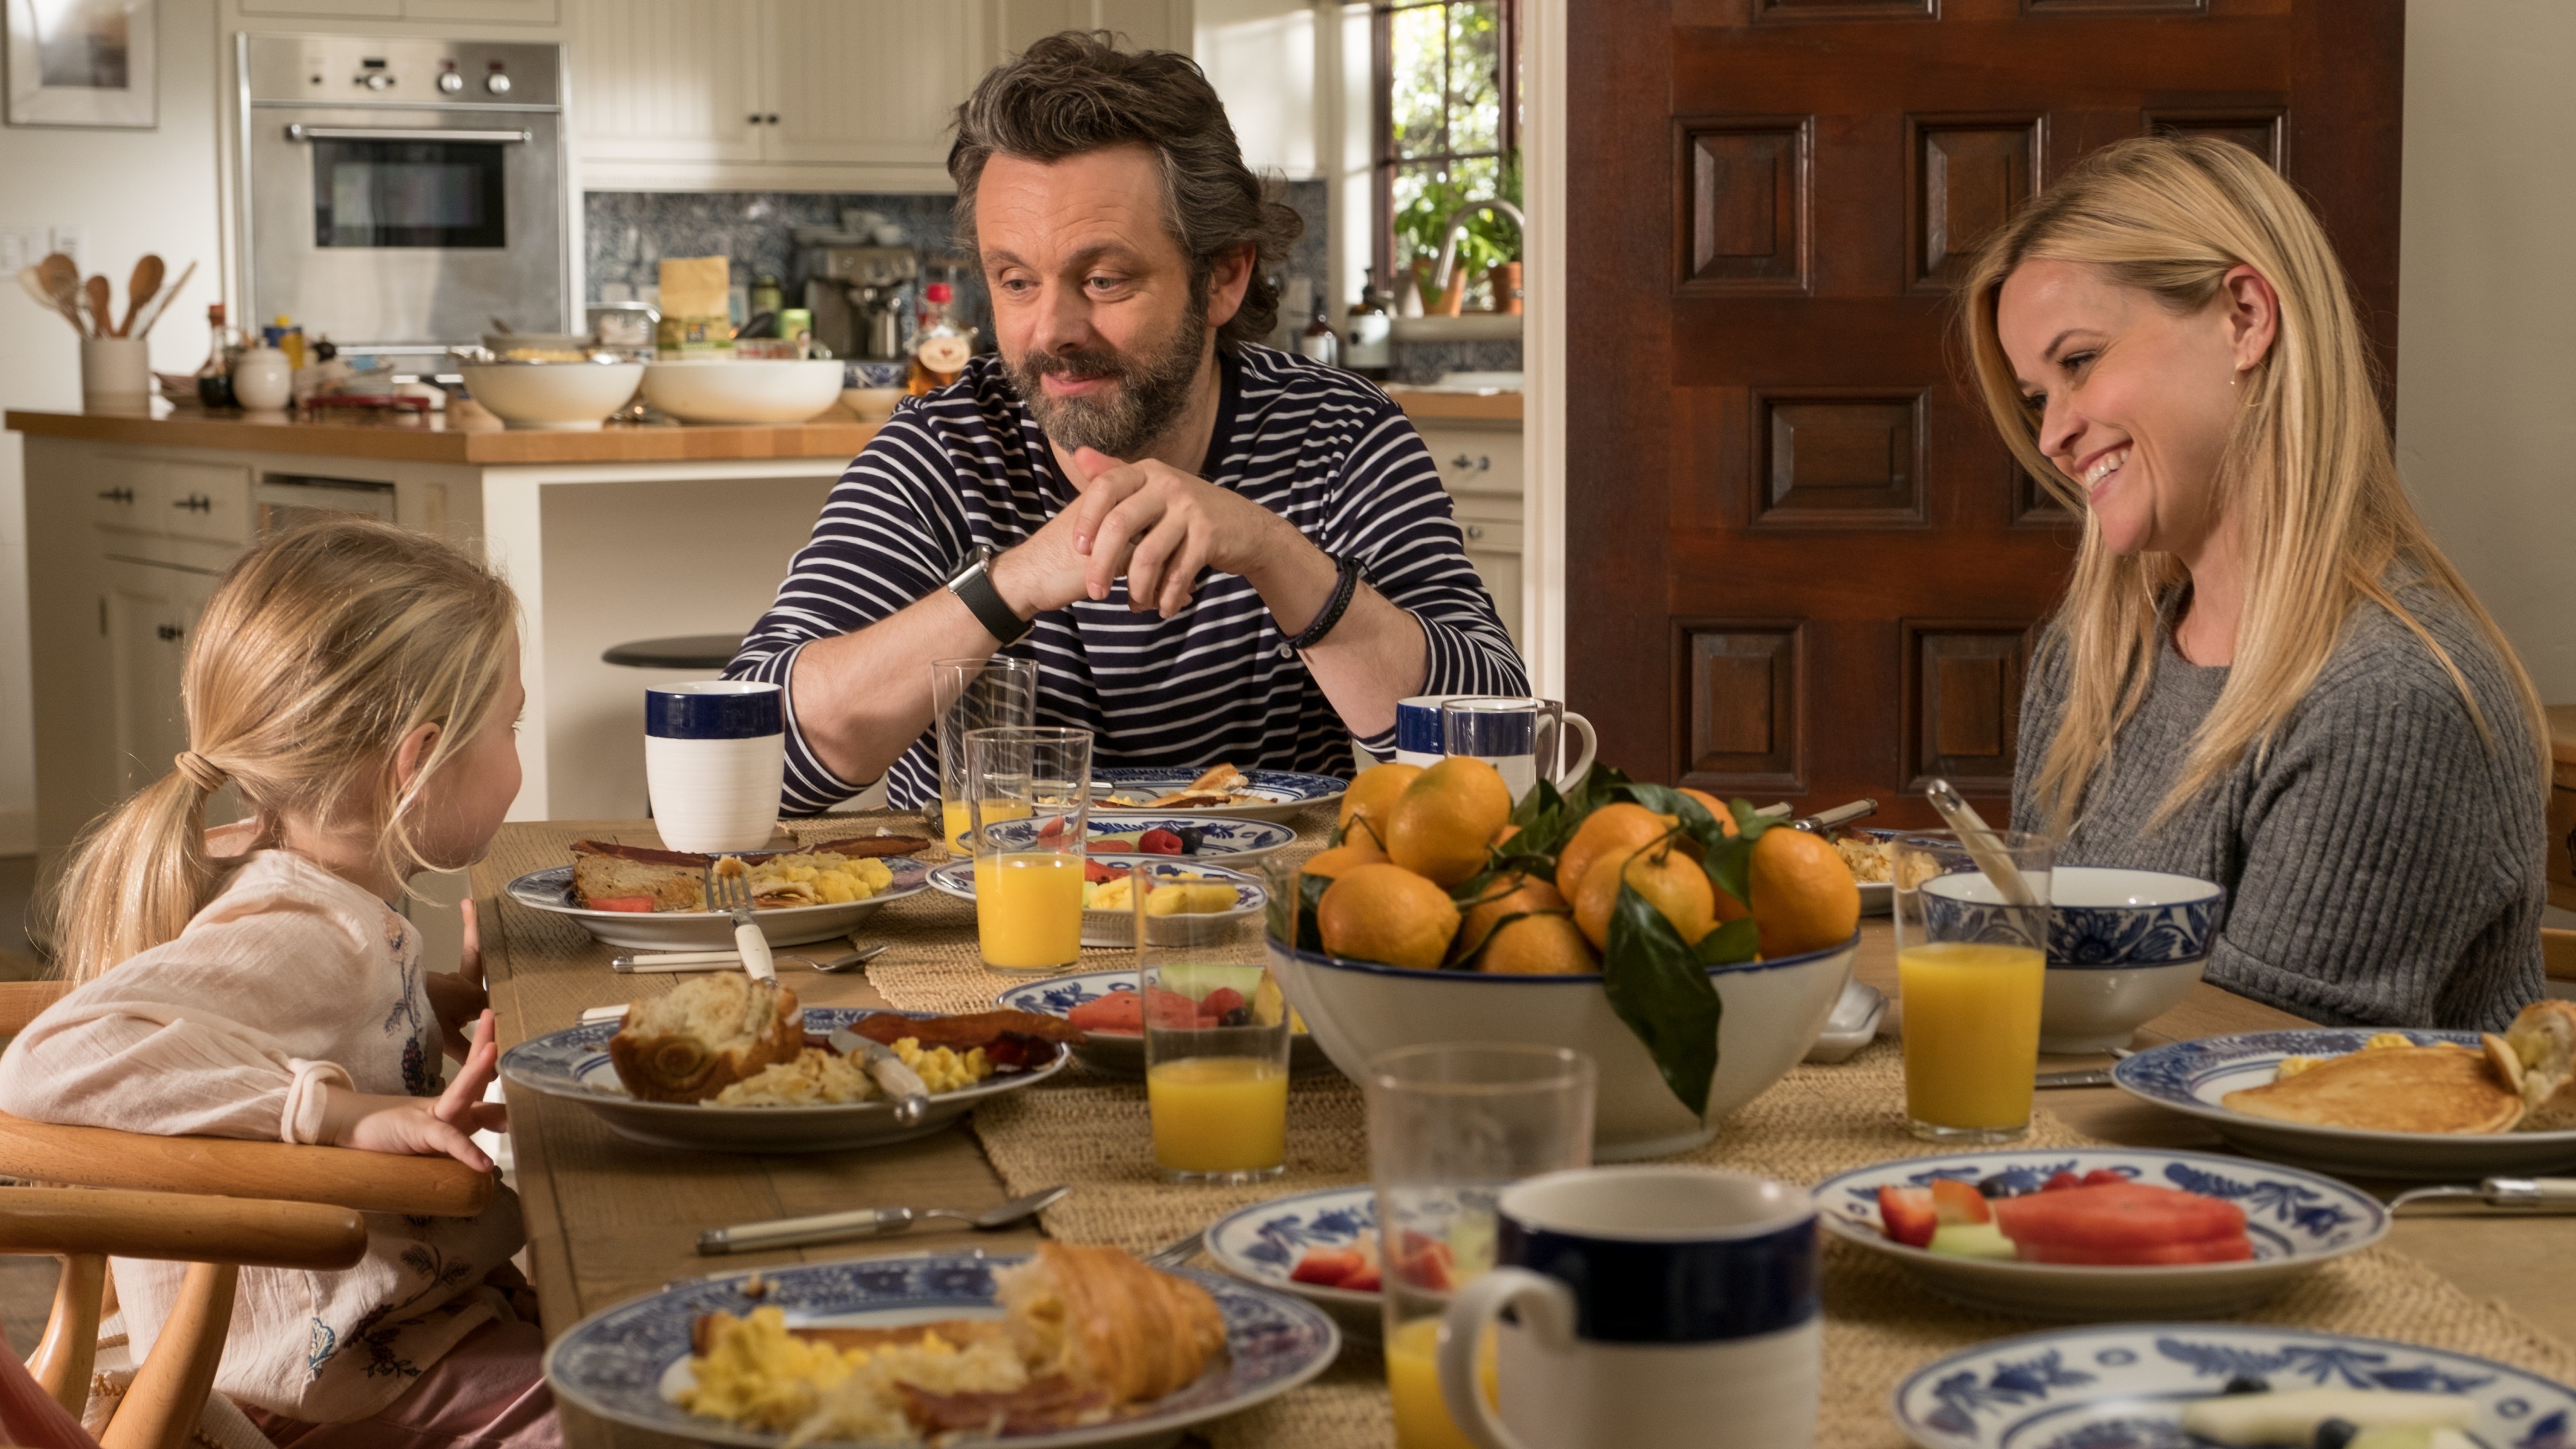 Reese Witherspoon, Home Again, Michael Sheen, 3840x2160 4K Desktop